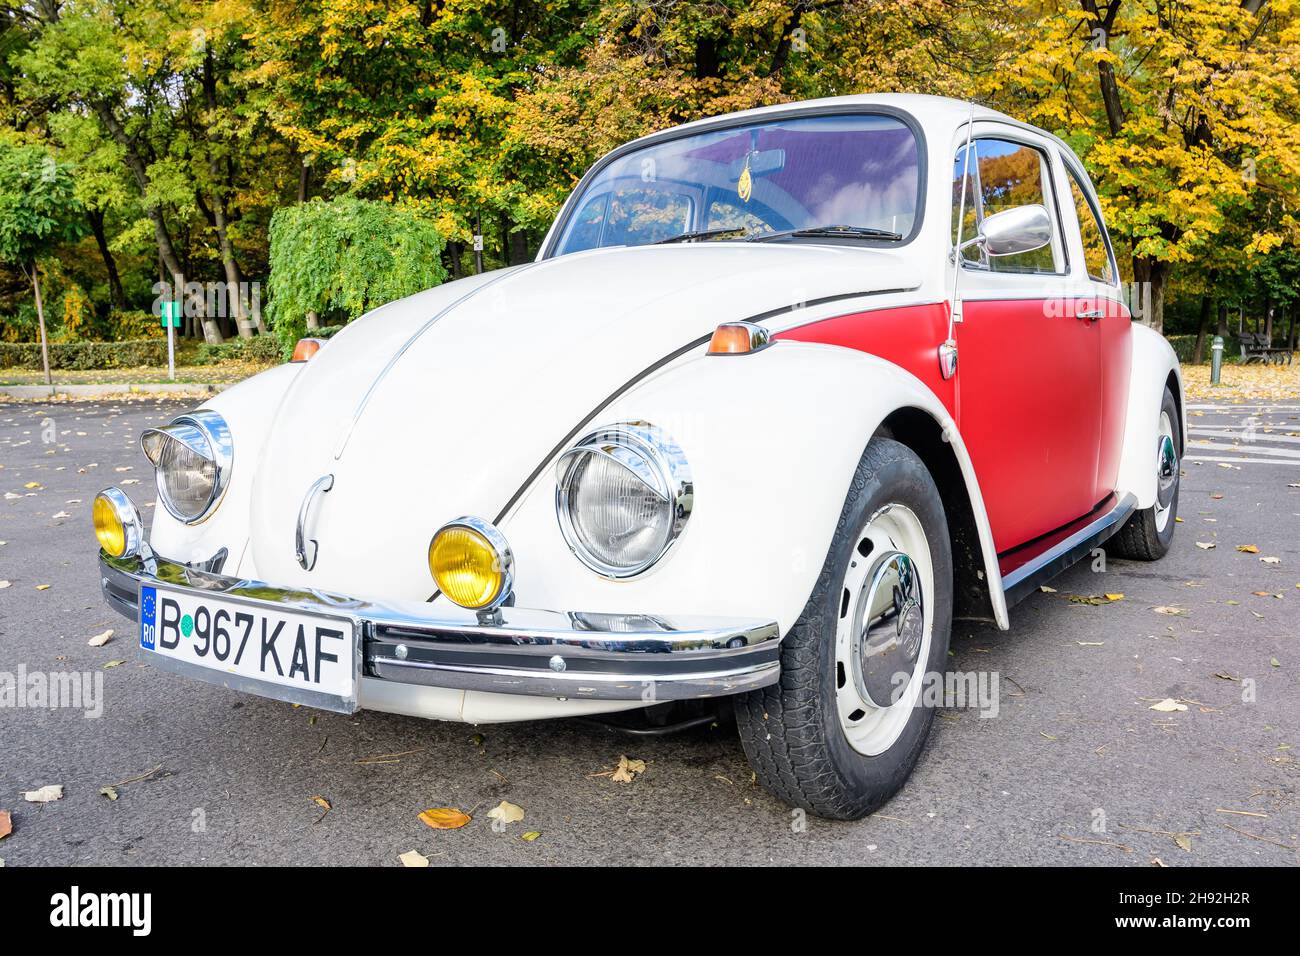 Bucharest, Romania, 24 October 2021: One vivid red and white Volkswagen Beetle German vintage car in traffic in a street at an event for vintage cars Stock Photo